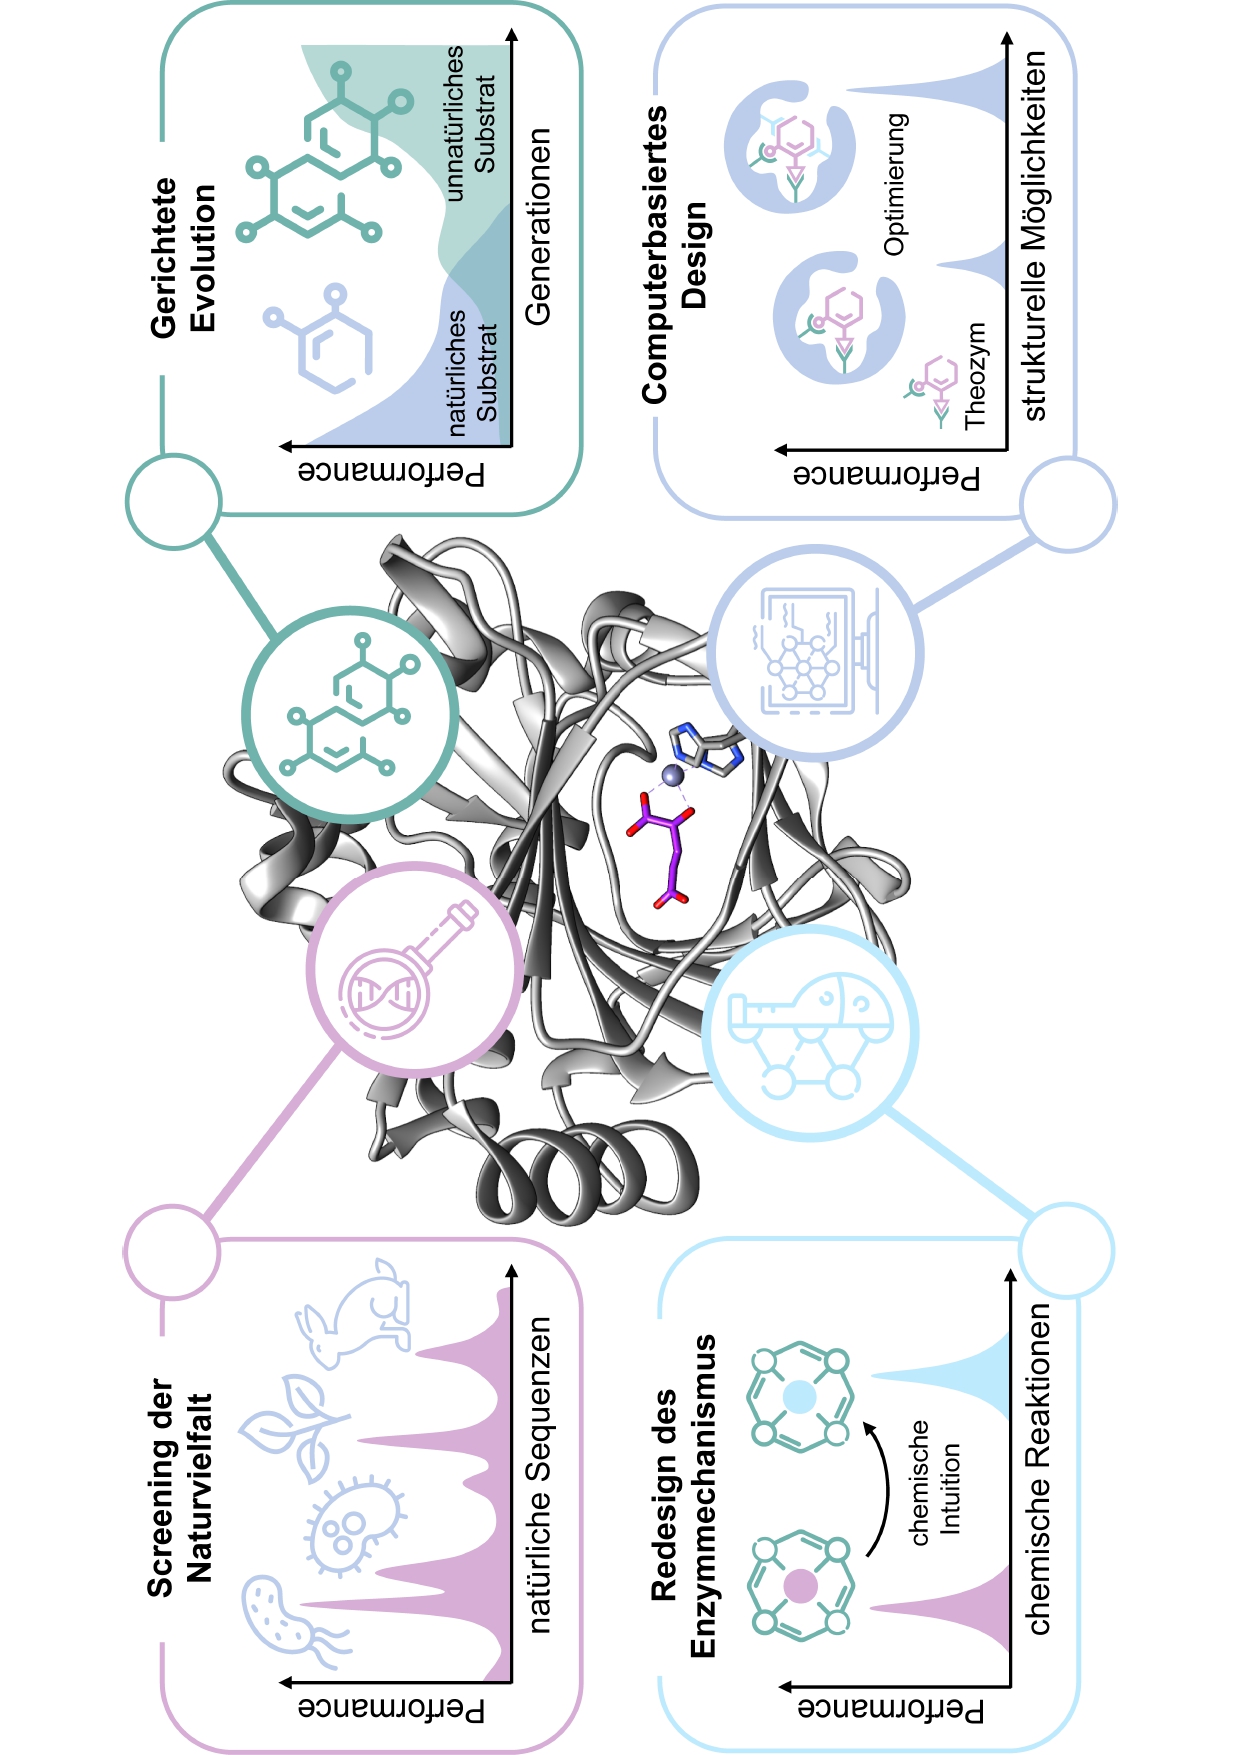 The image shows four strategies for designing biocatalysts